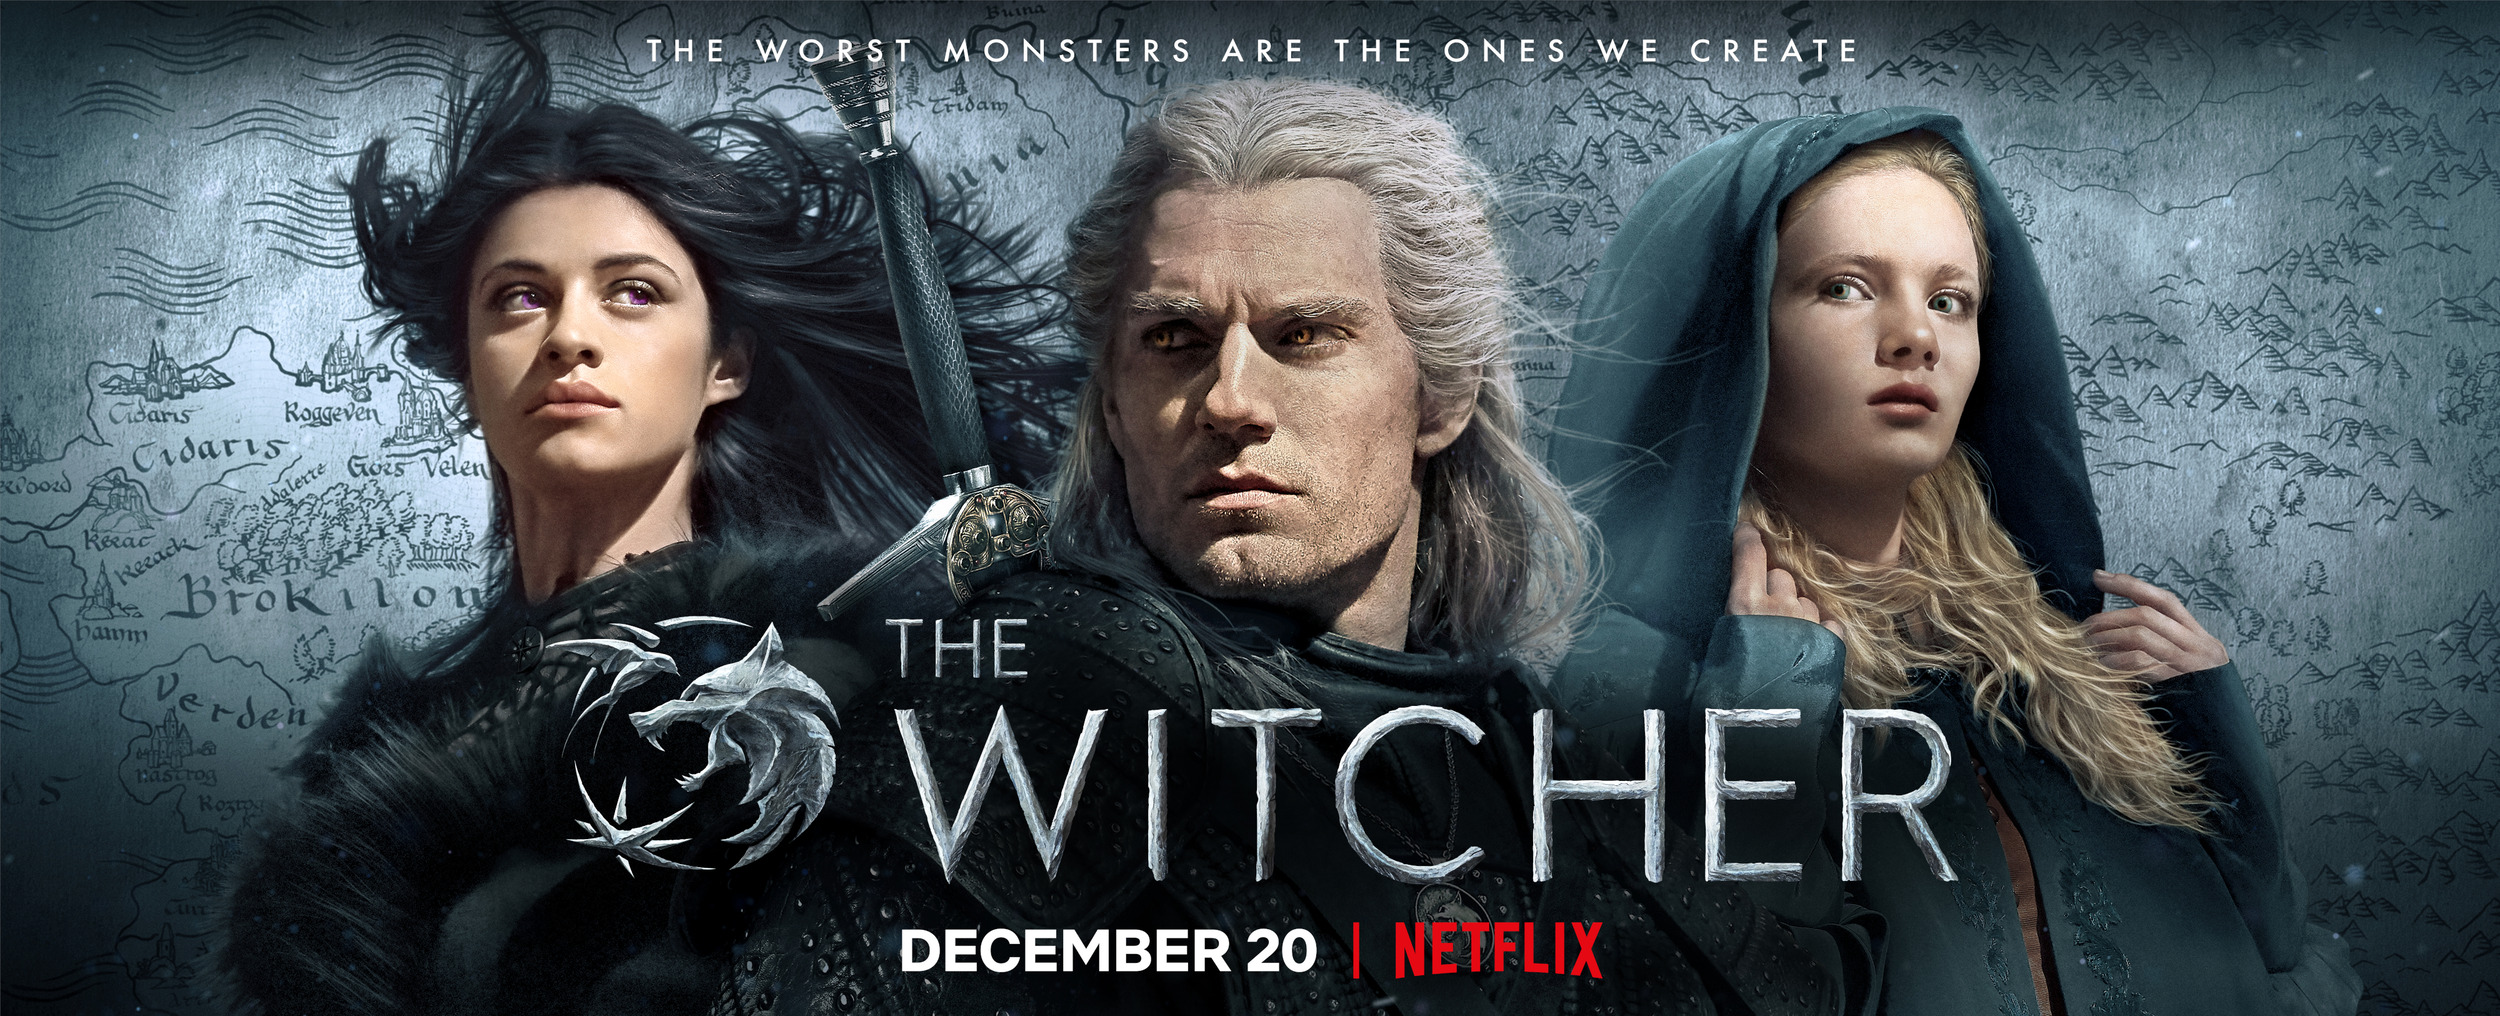 Mega Sized Movie Poster Image for The Witcher (#6 of 16)